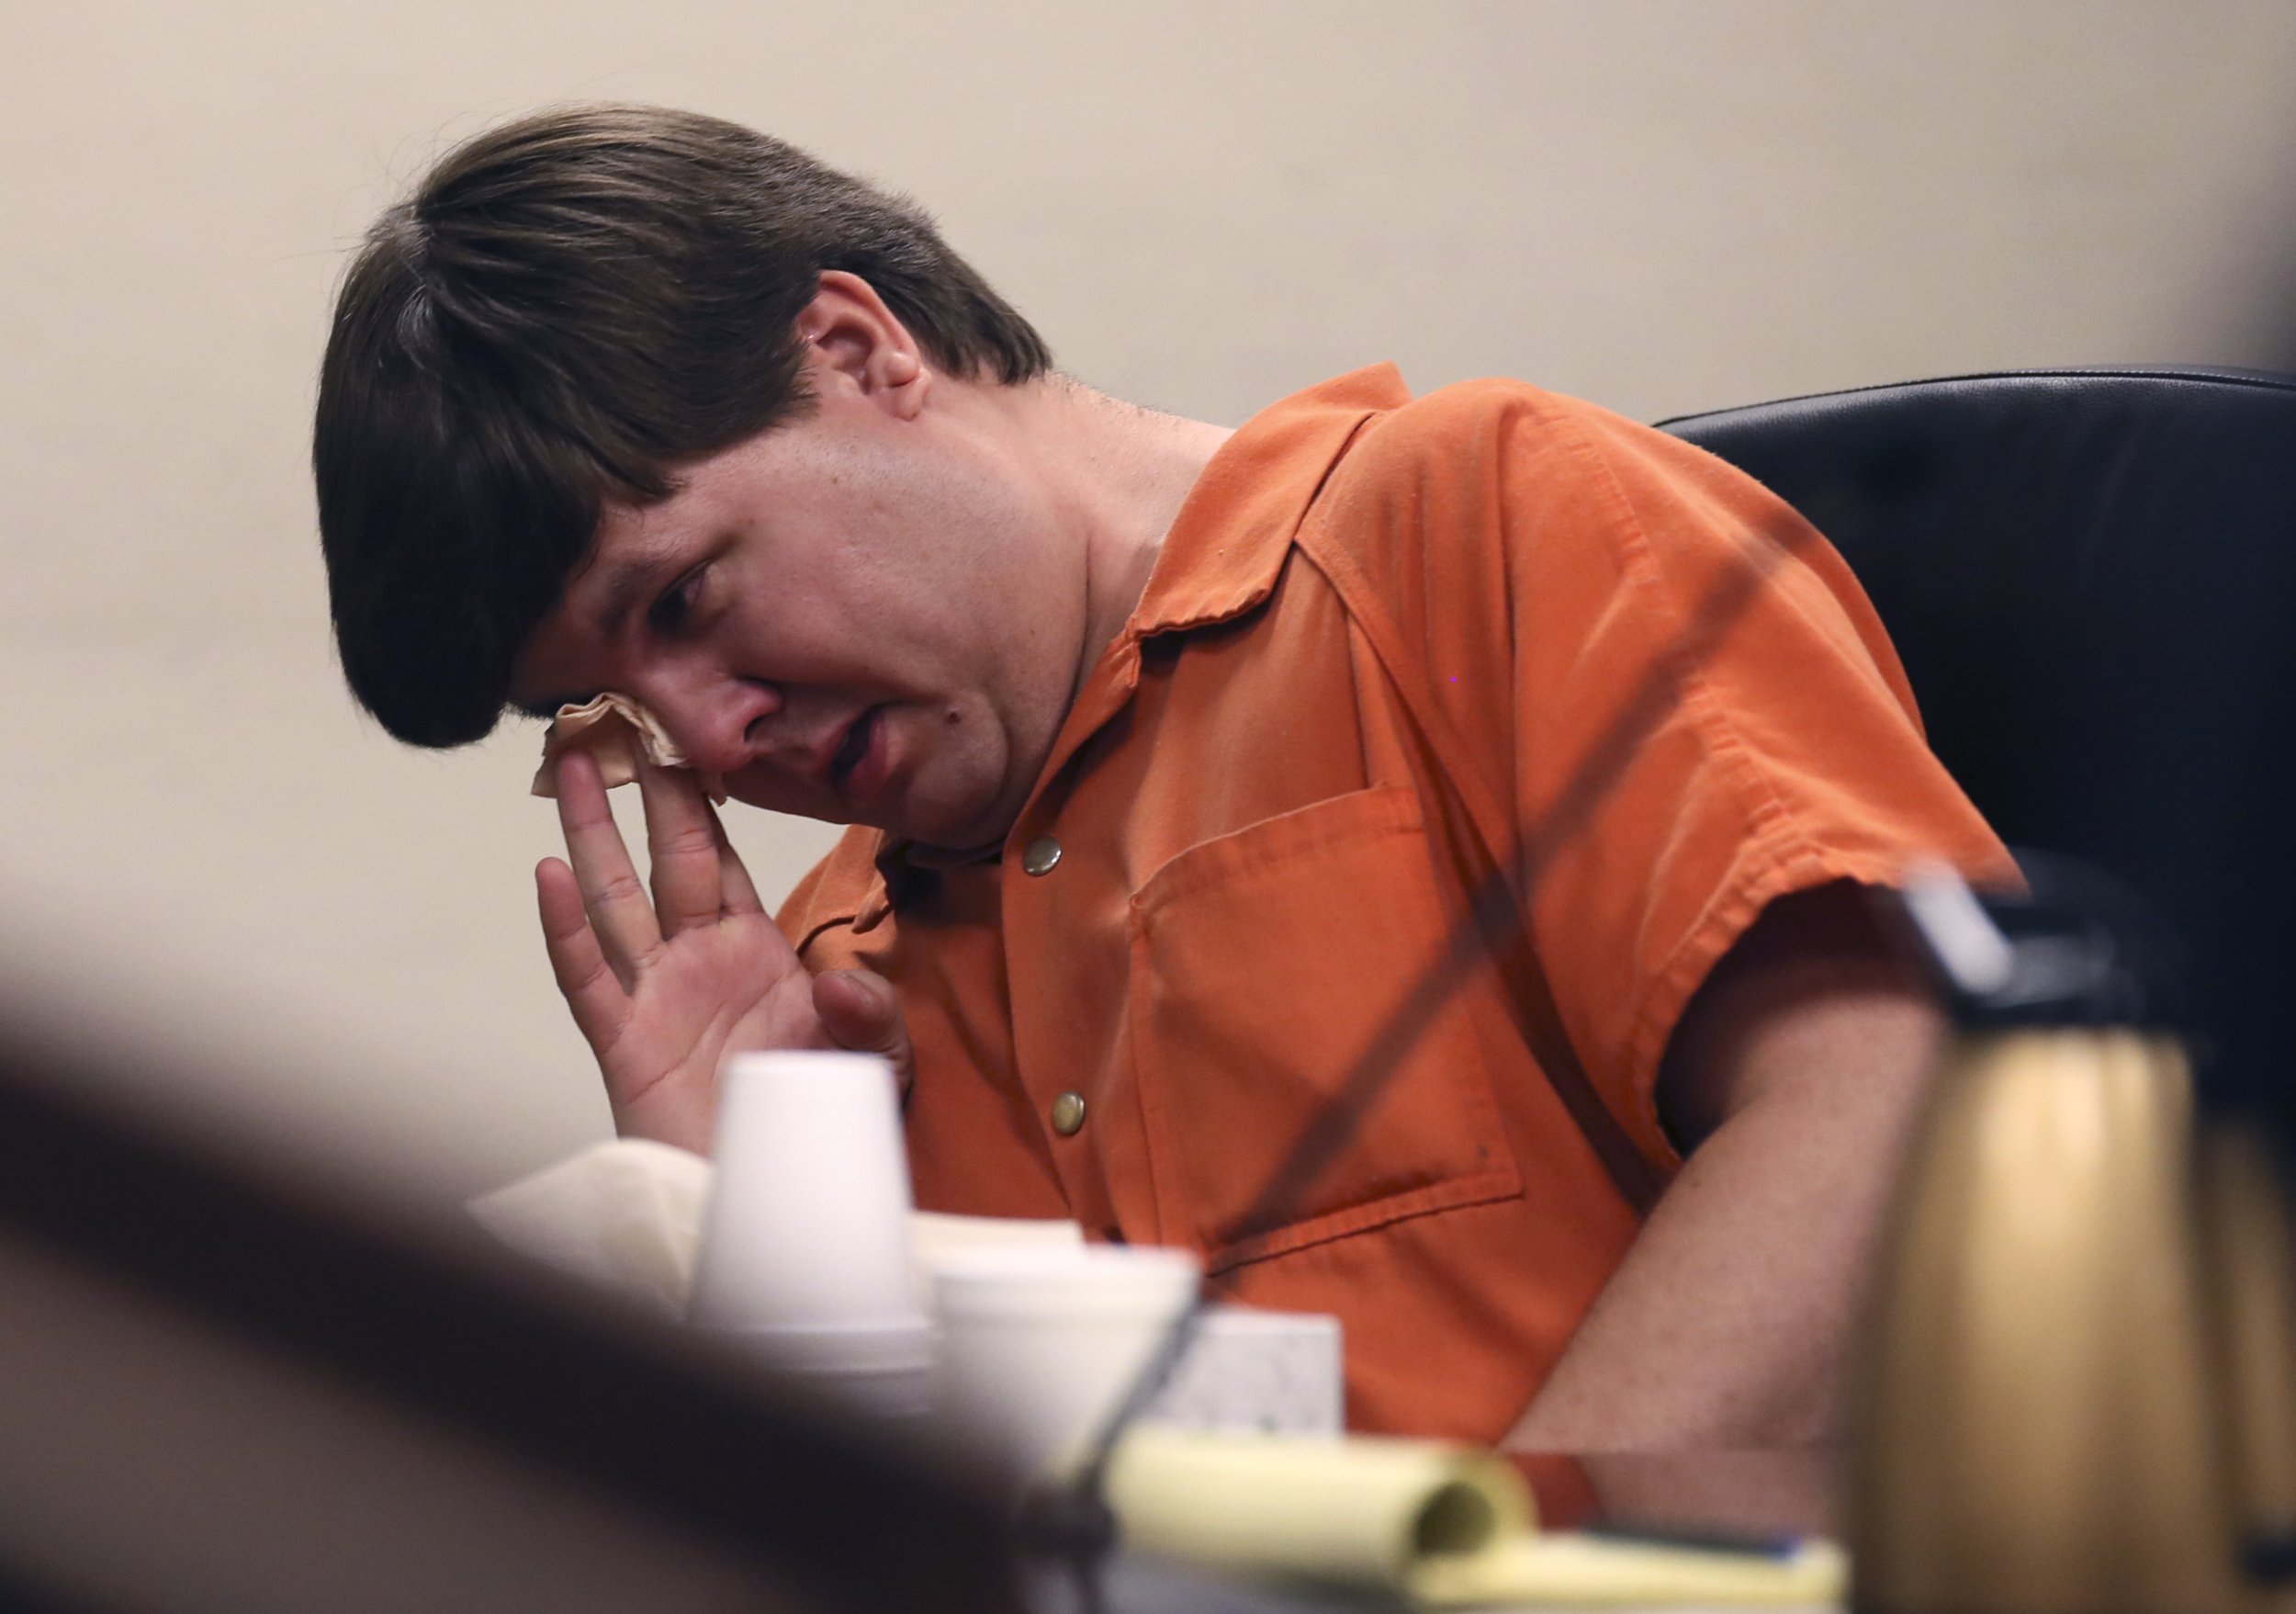 Child Car Heat Deaths Continue Even As Justin Ross Harris Stands Trial